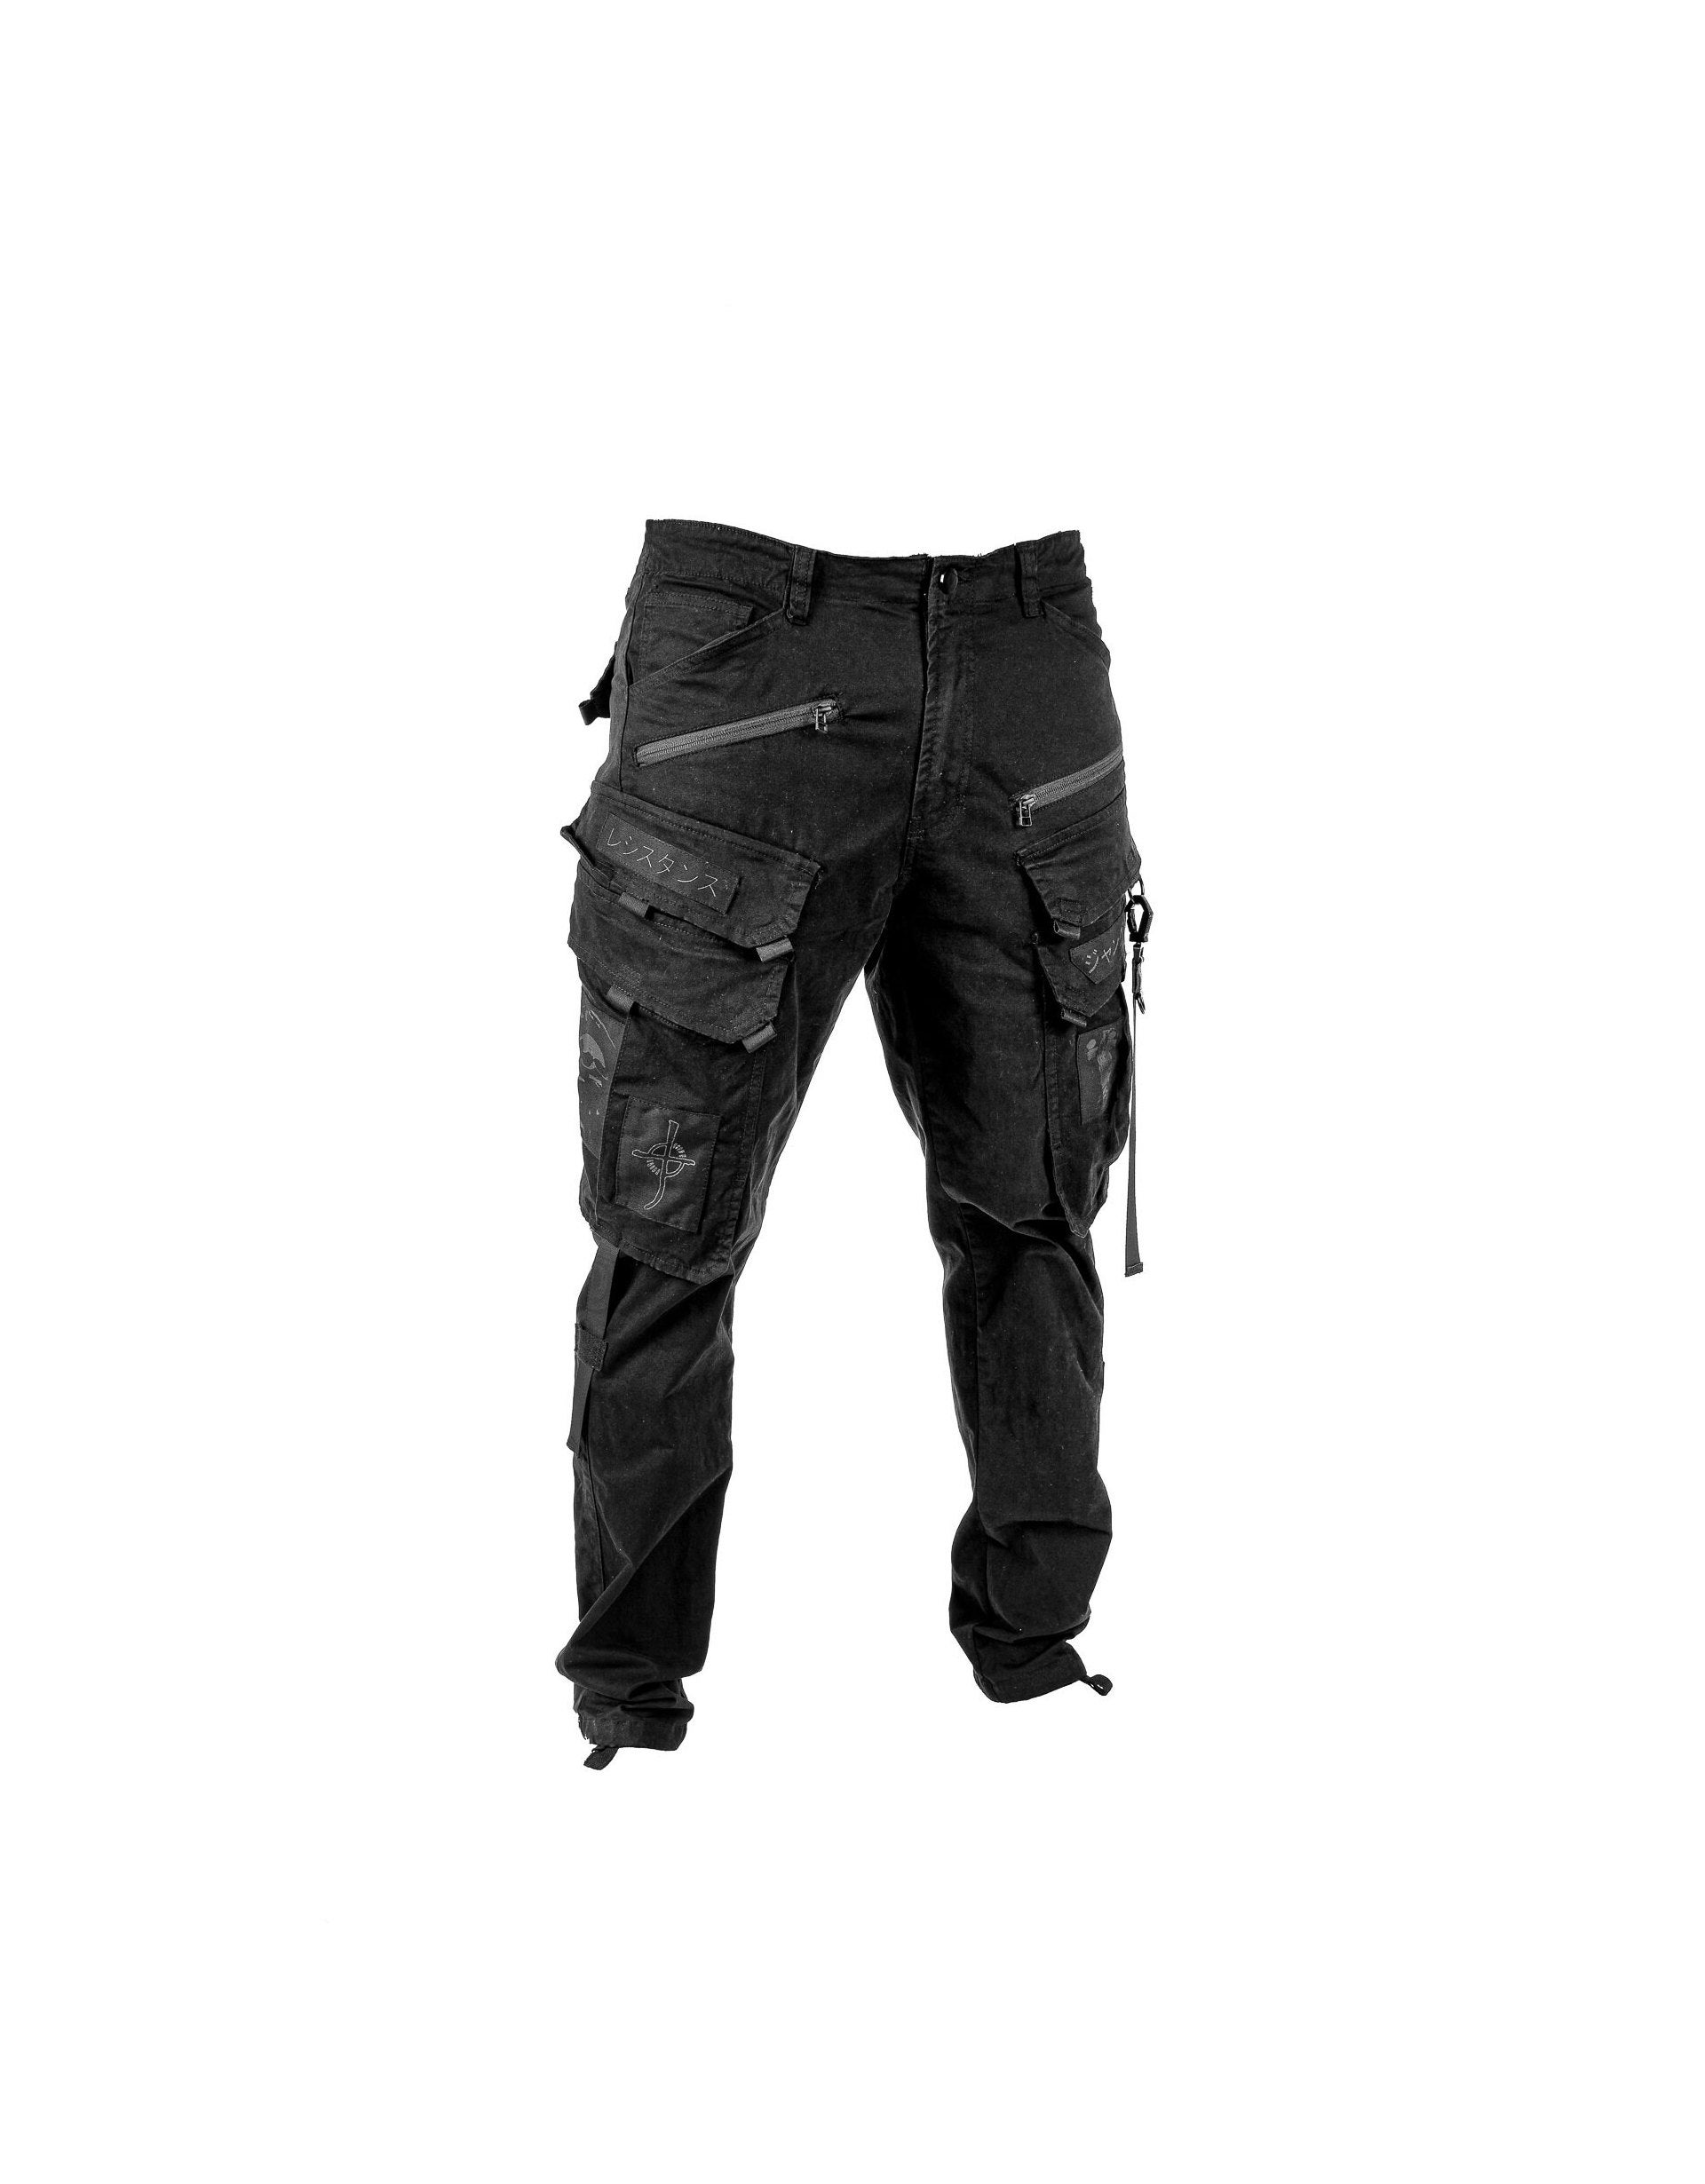 Vintage Cargo Mens Trousers For Men Flipkart Y2K Aesthetics, Elastic High  Waist, Solid Color, Streetwear & Outdoor Sports Bottoms From Tutucloth,  $27.47 | DHgate.Com